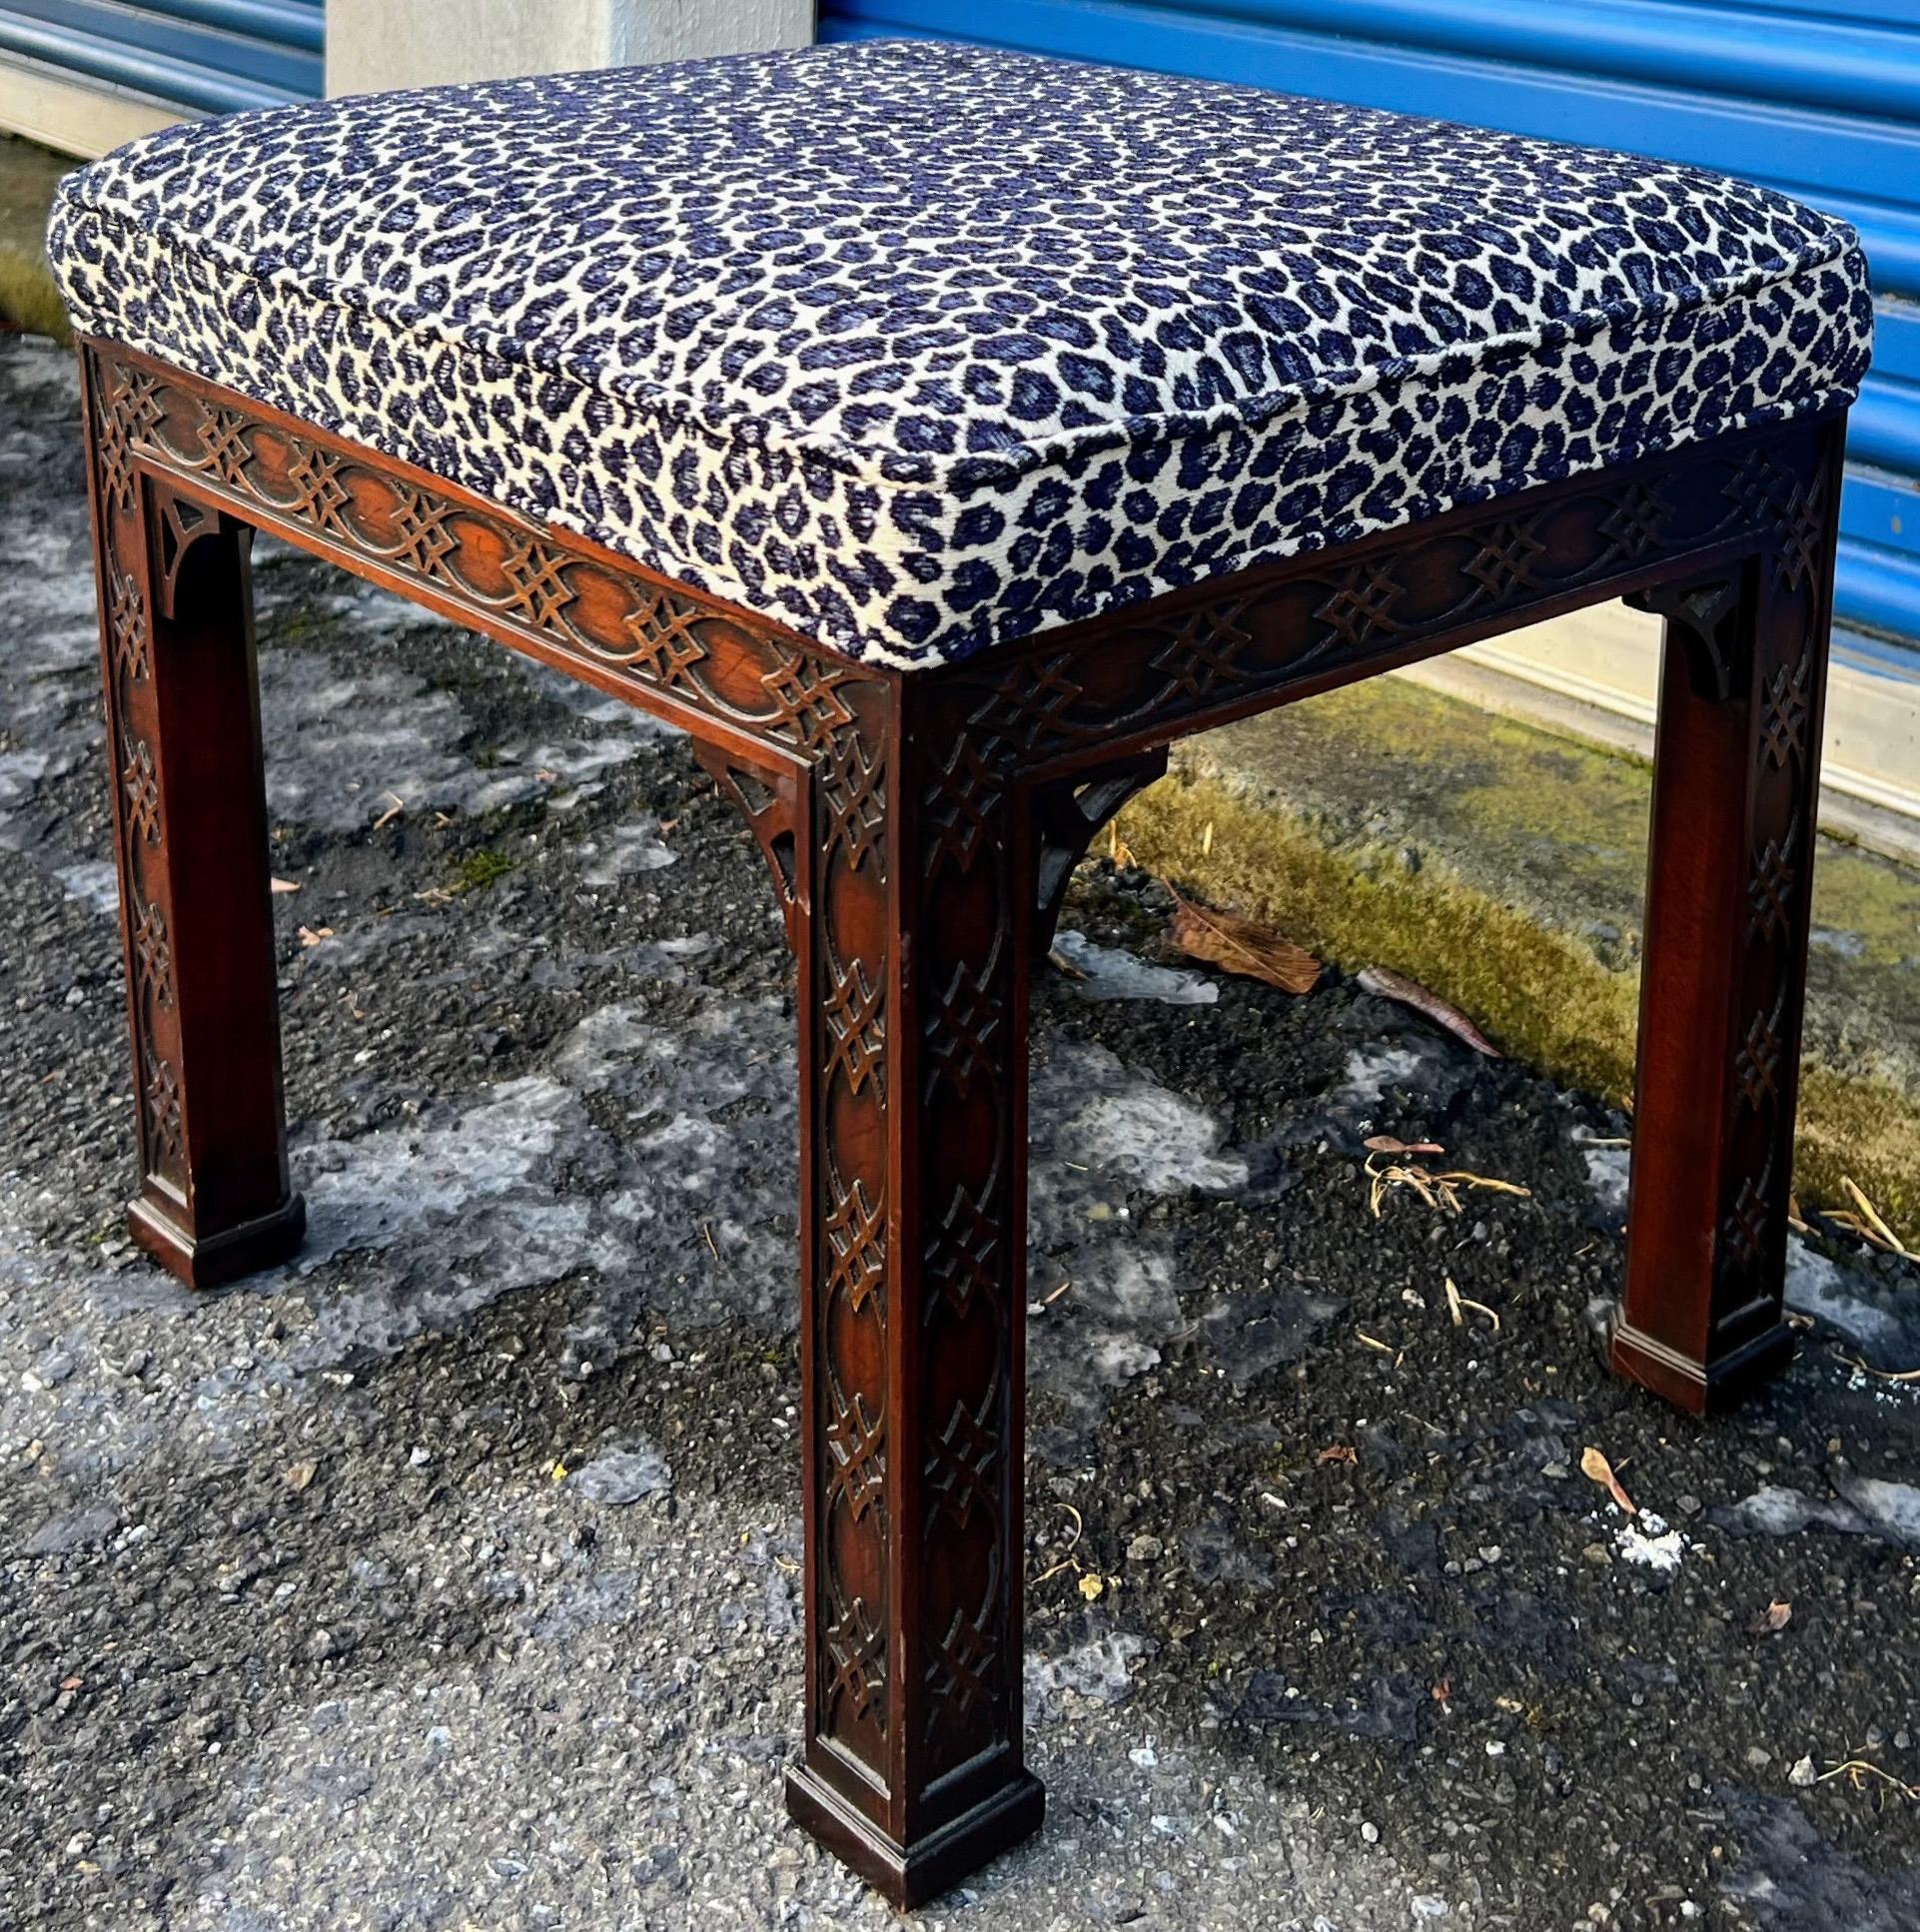 This is a set that pushes all of the buttons. It is by Kindel. The set is carved mahogany with Chinese Chippendale styling. The ottomans are newly upholstered in leopard. They measure 19”L x 16.5”W x 17.5”H. The console is marked.

My shipping is